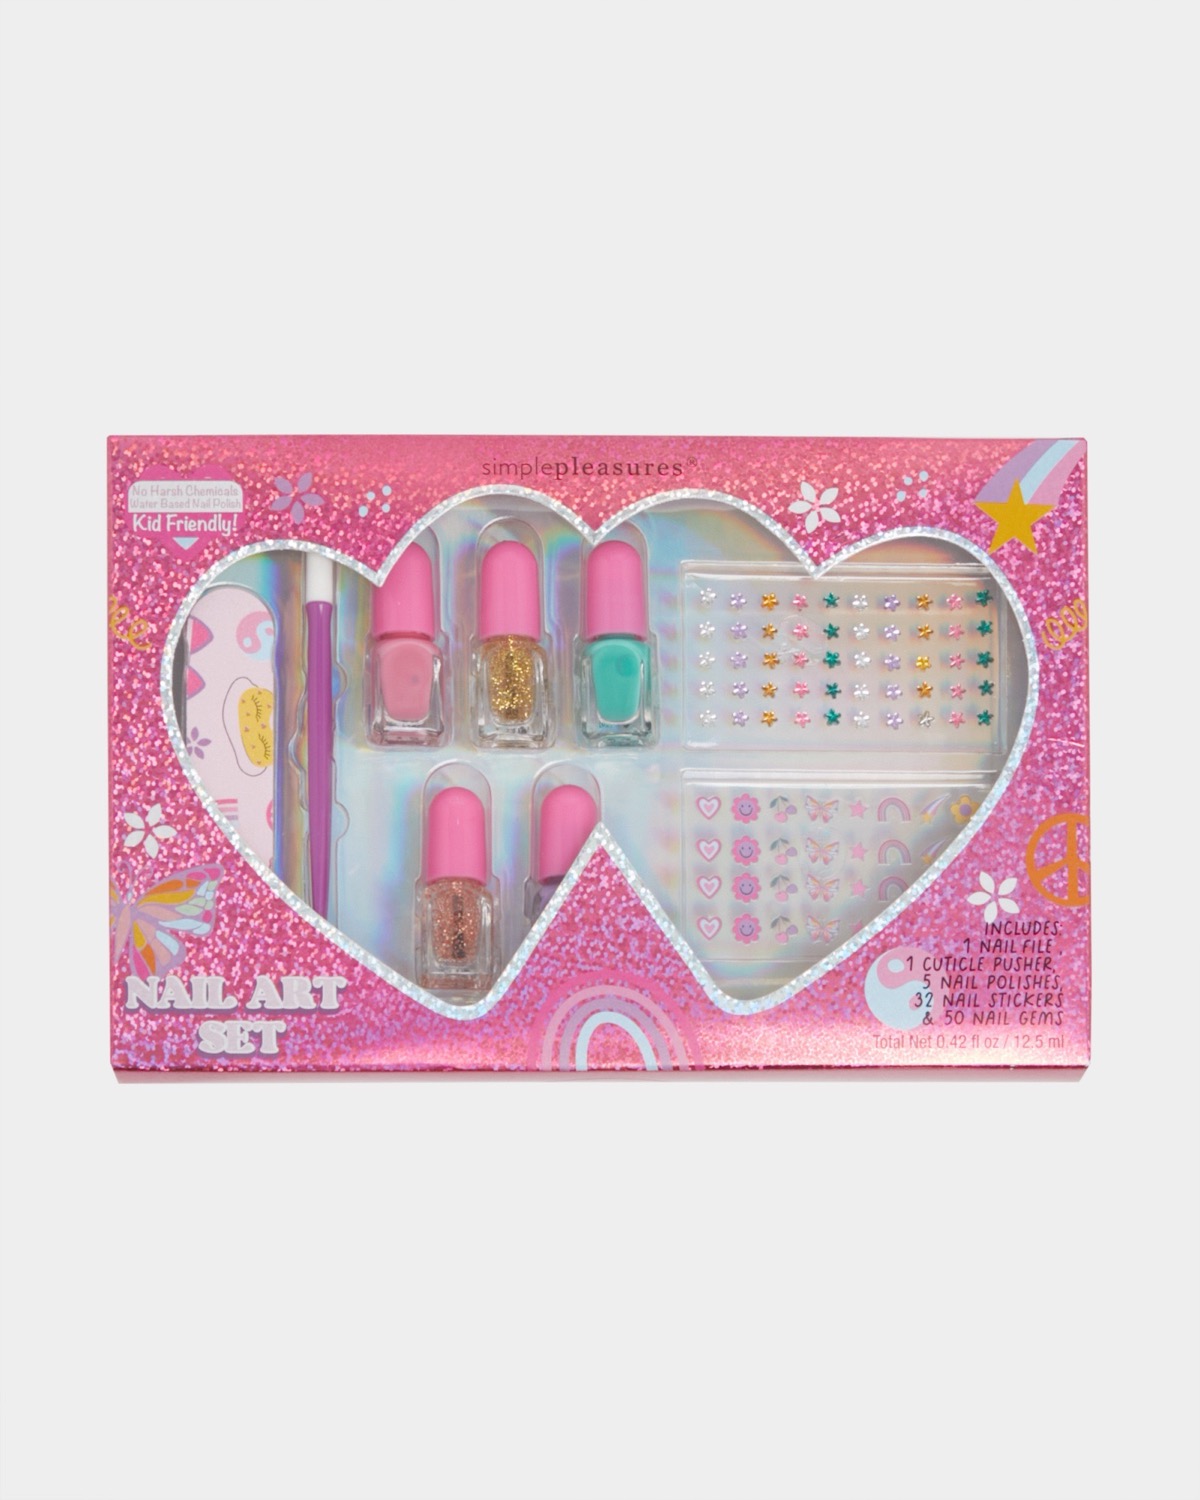 Nail Art Studio for Girls - Nail Polish Kit for Kids Ages 7-12 Years Old -  Girl Gifts Ideas - Girls Nails Gift Set - Cool Girly Stuff - Polish, Pens, Nail  Kit For Girls Ages 7-12